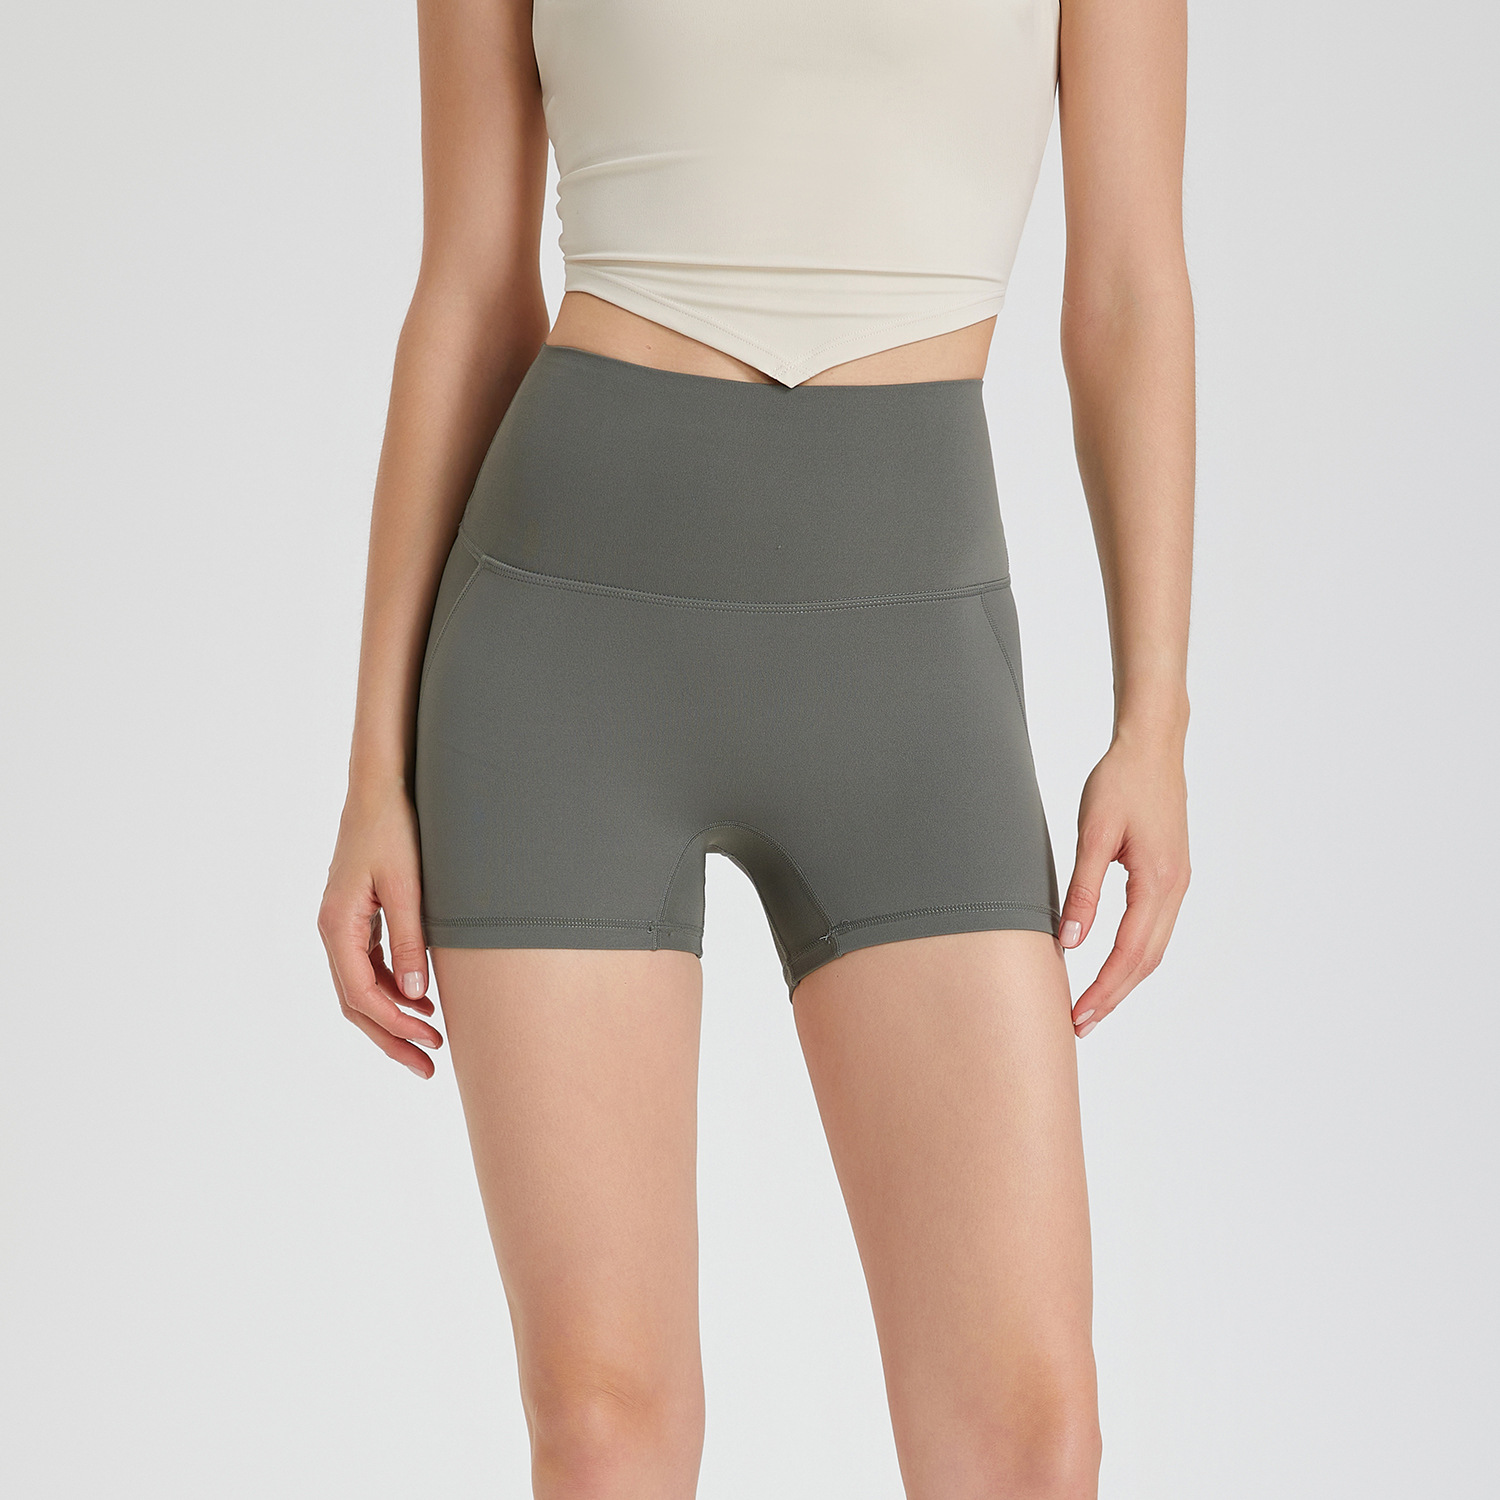 High waisted and buttocks lifted seamless sports shorts